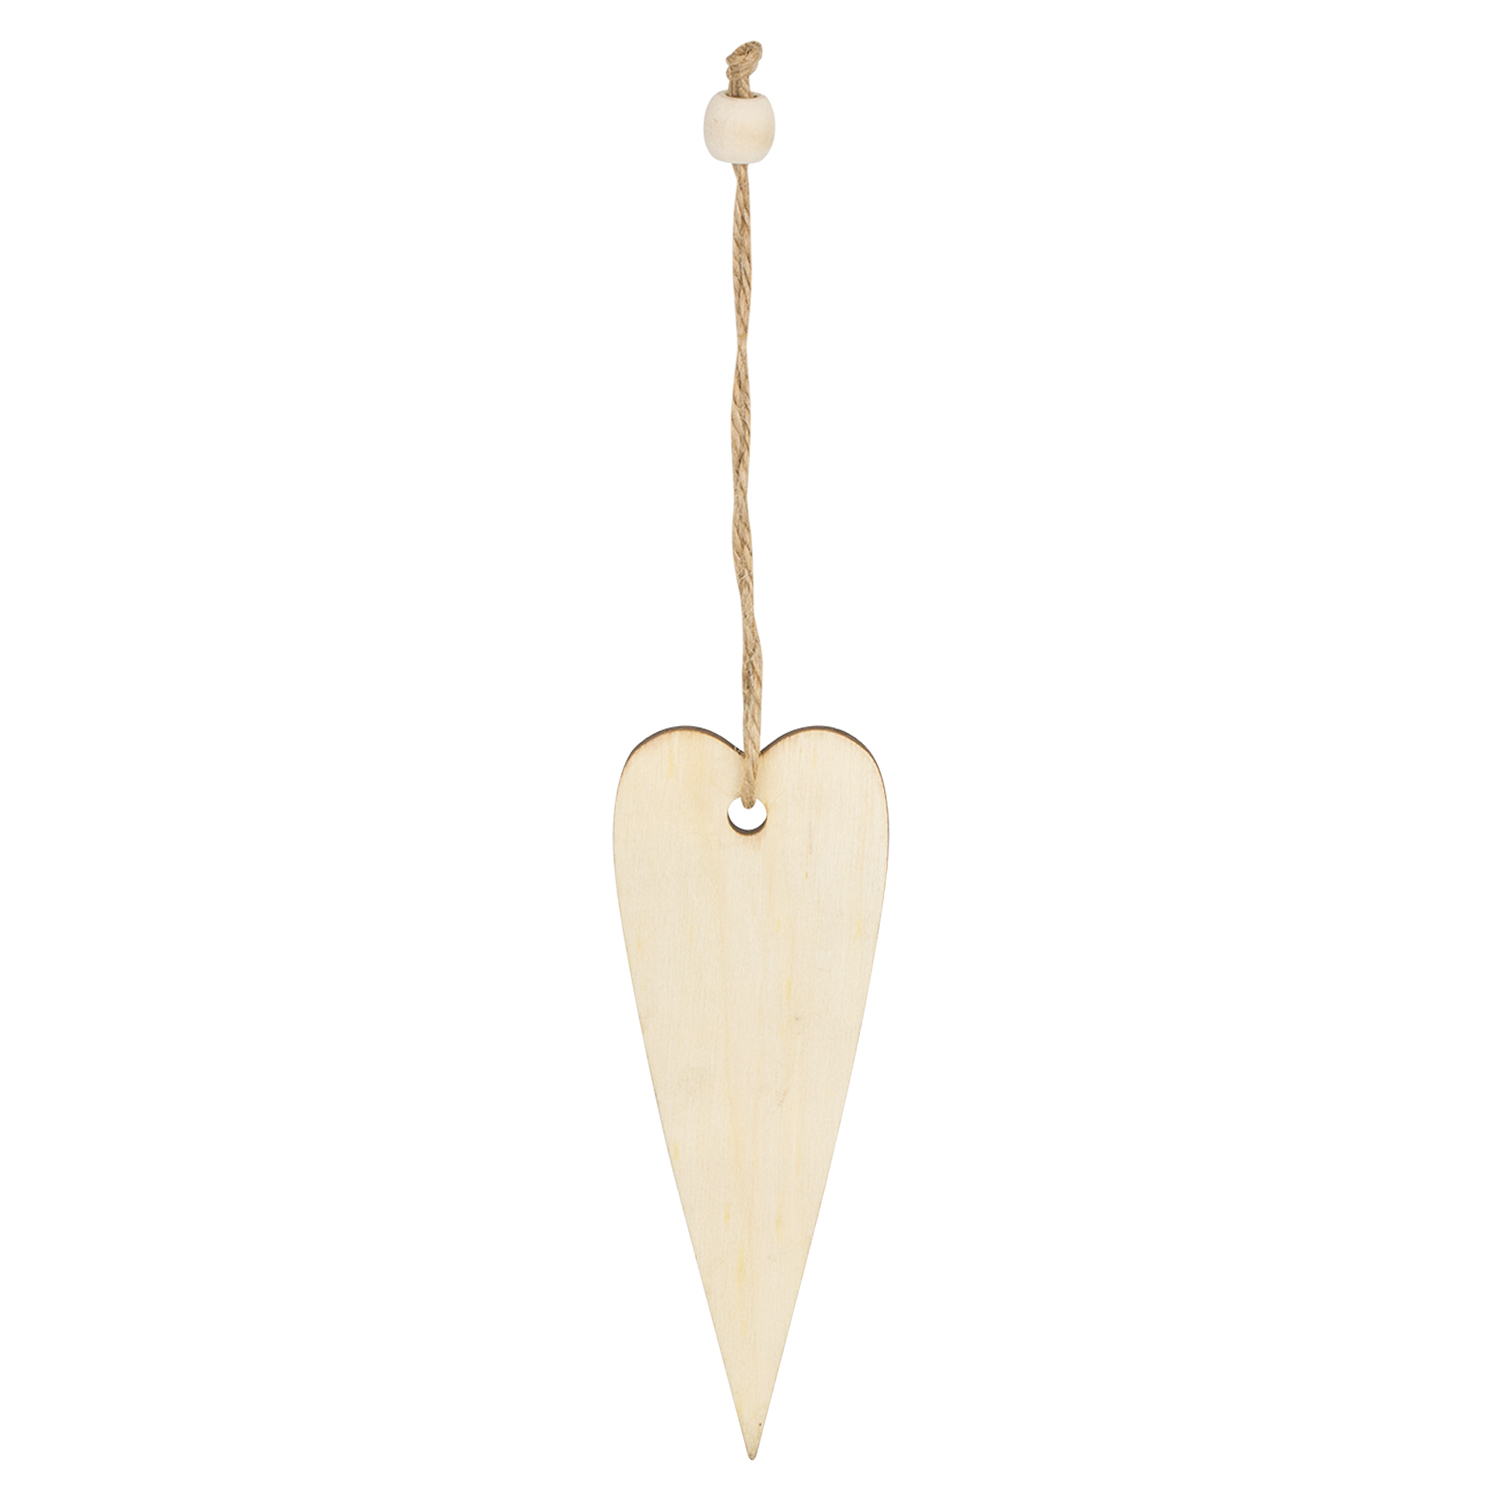 Wooden Ornament Hanging Decoration Image 4